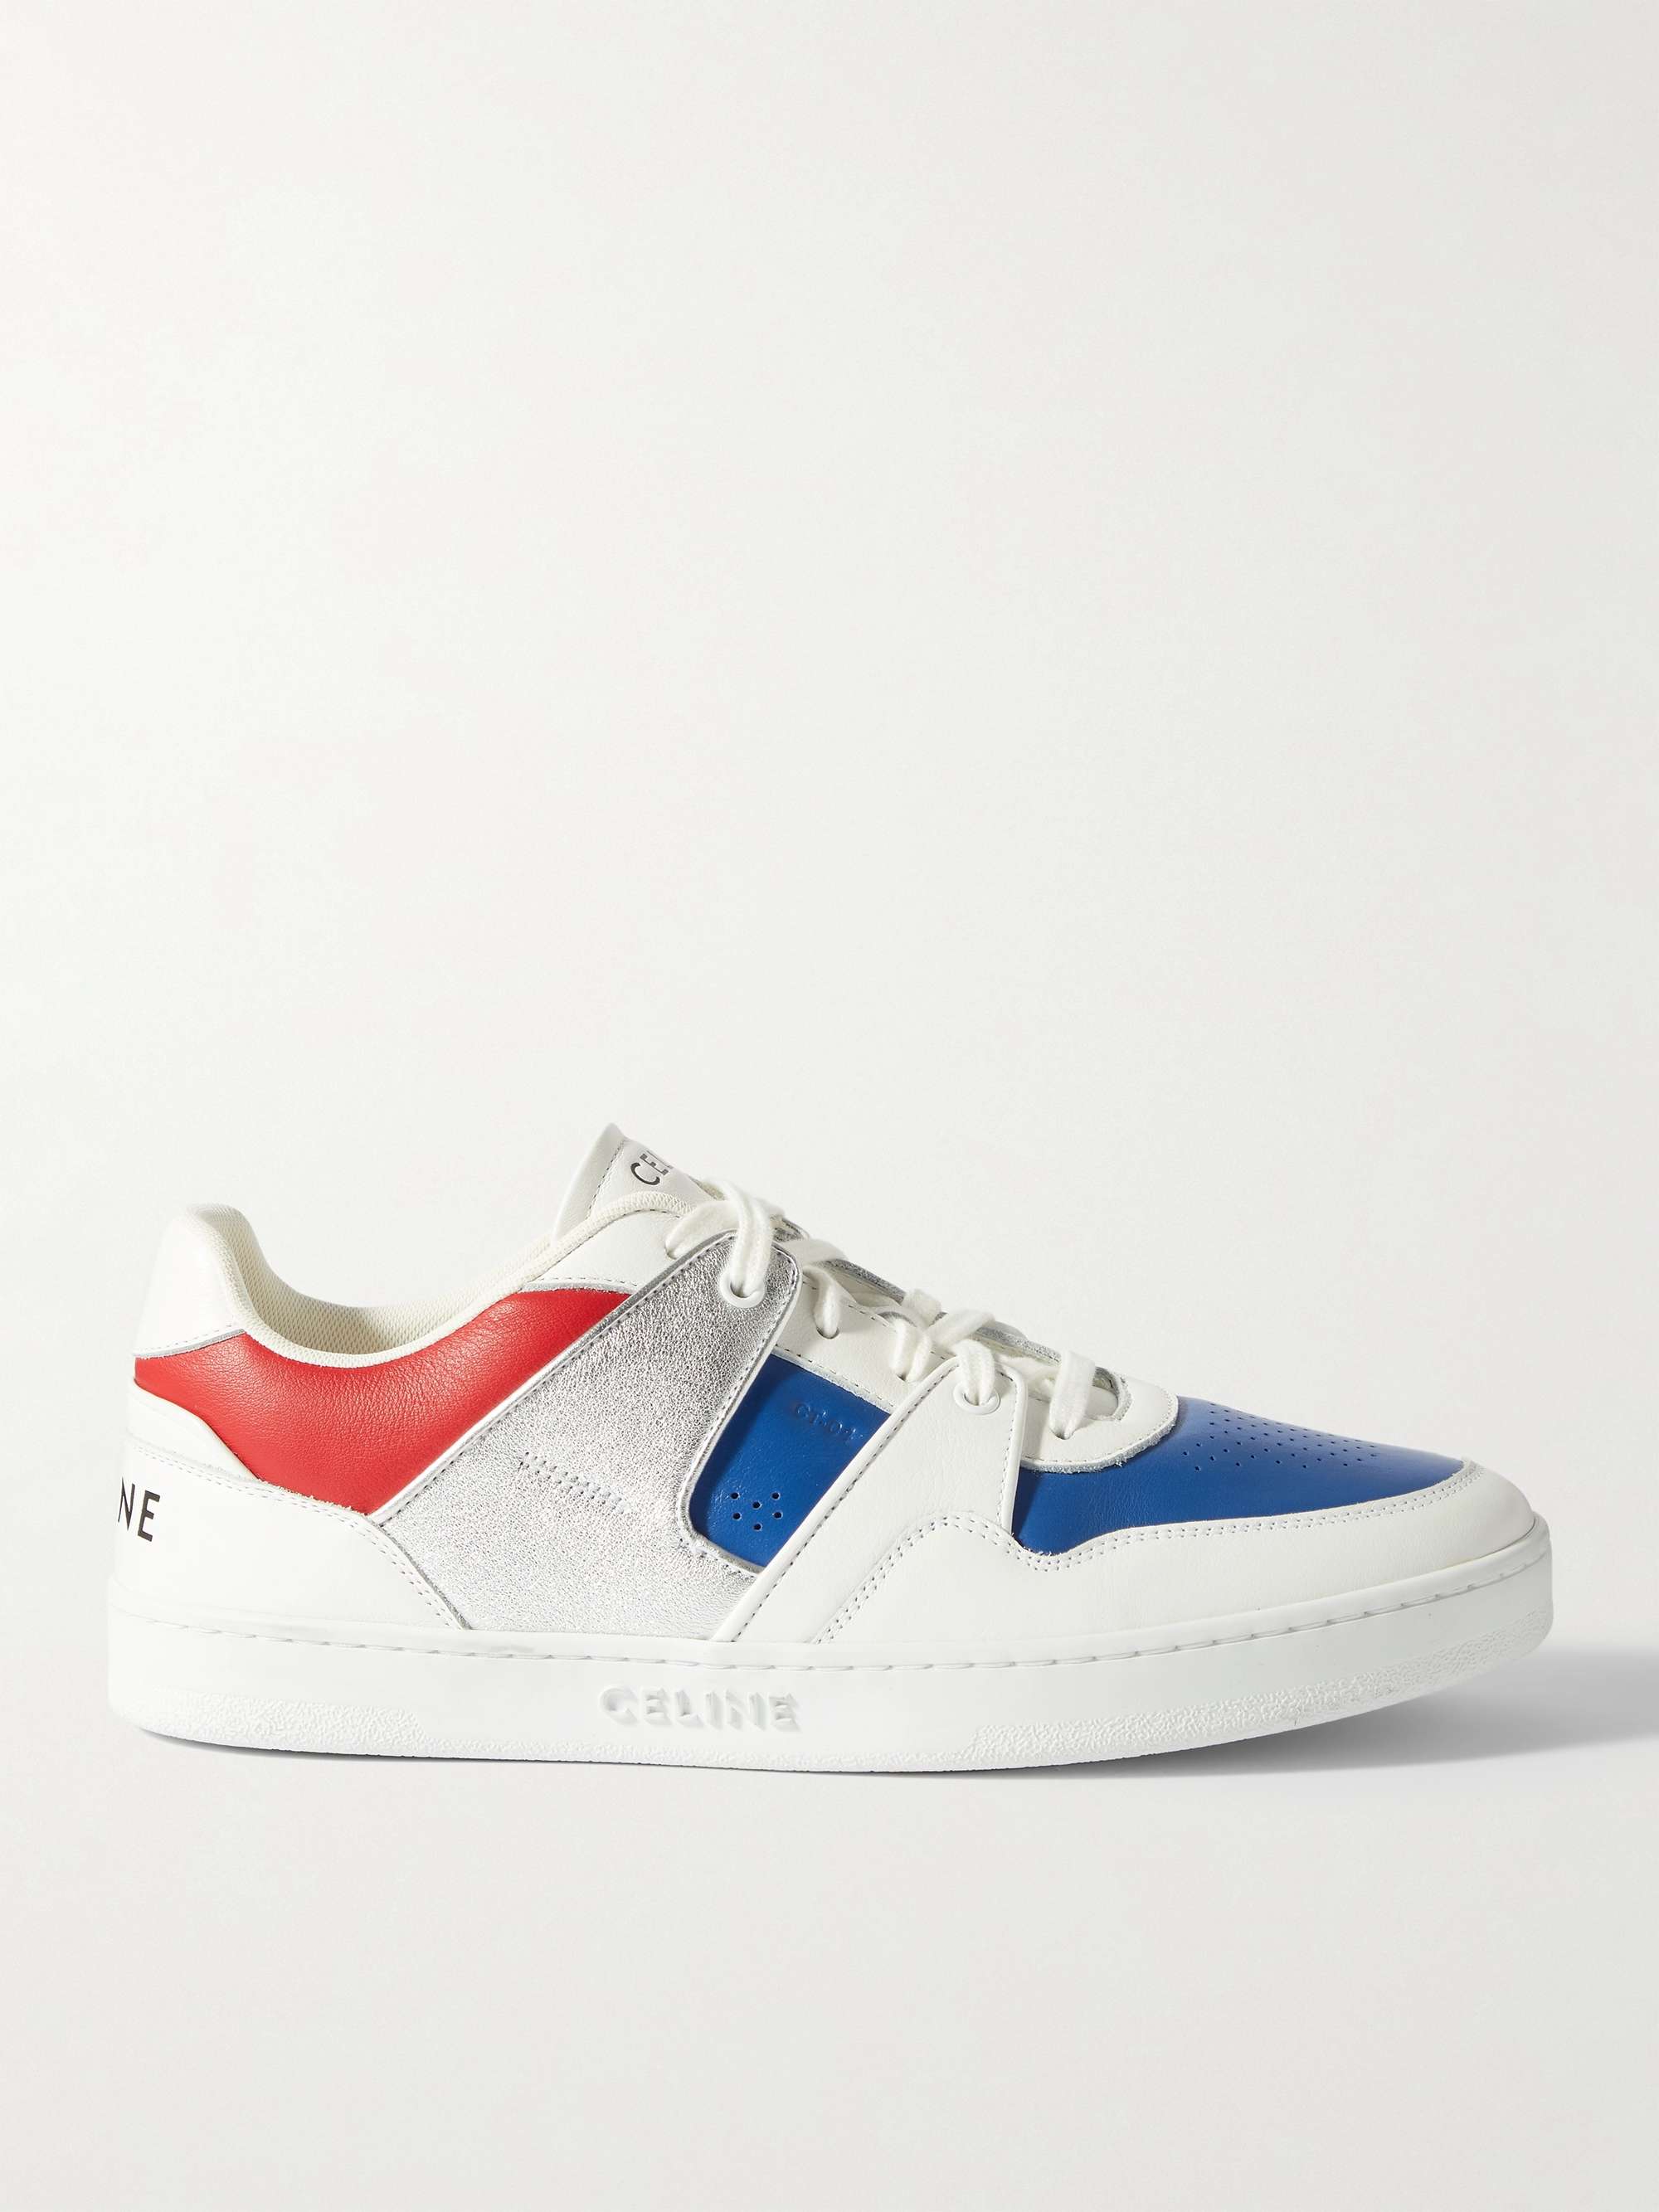 CELINE HOMME CT-04 Leather Sneakers